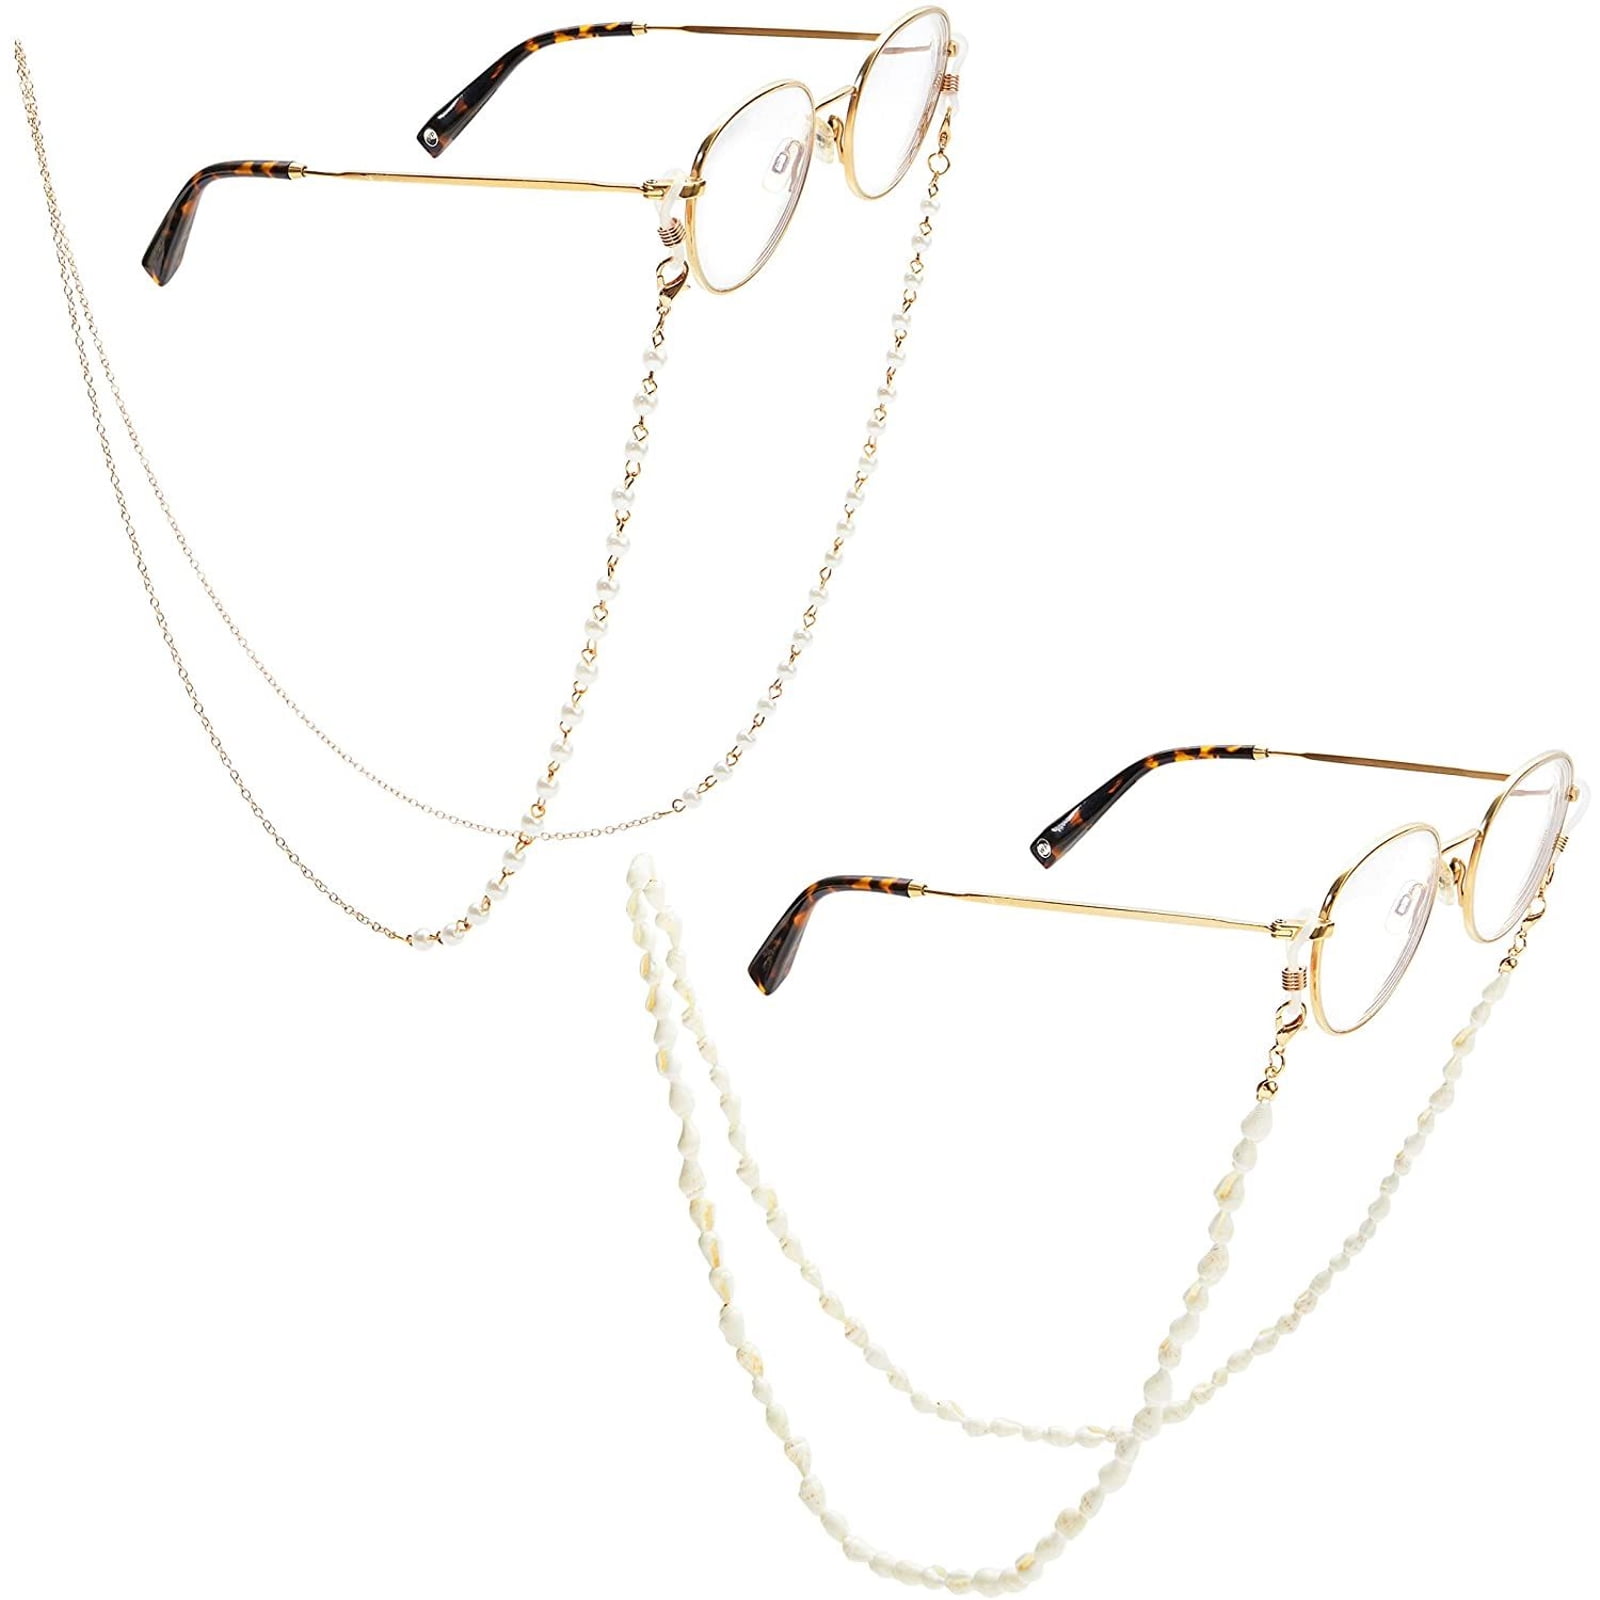 2 Pack Beaded Eyeglass Chains, Pearl & Shell Glasses Chains Strap for Women  Sunglass Holder Accessories